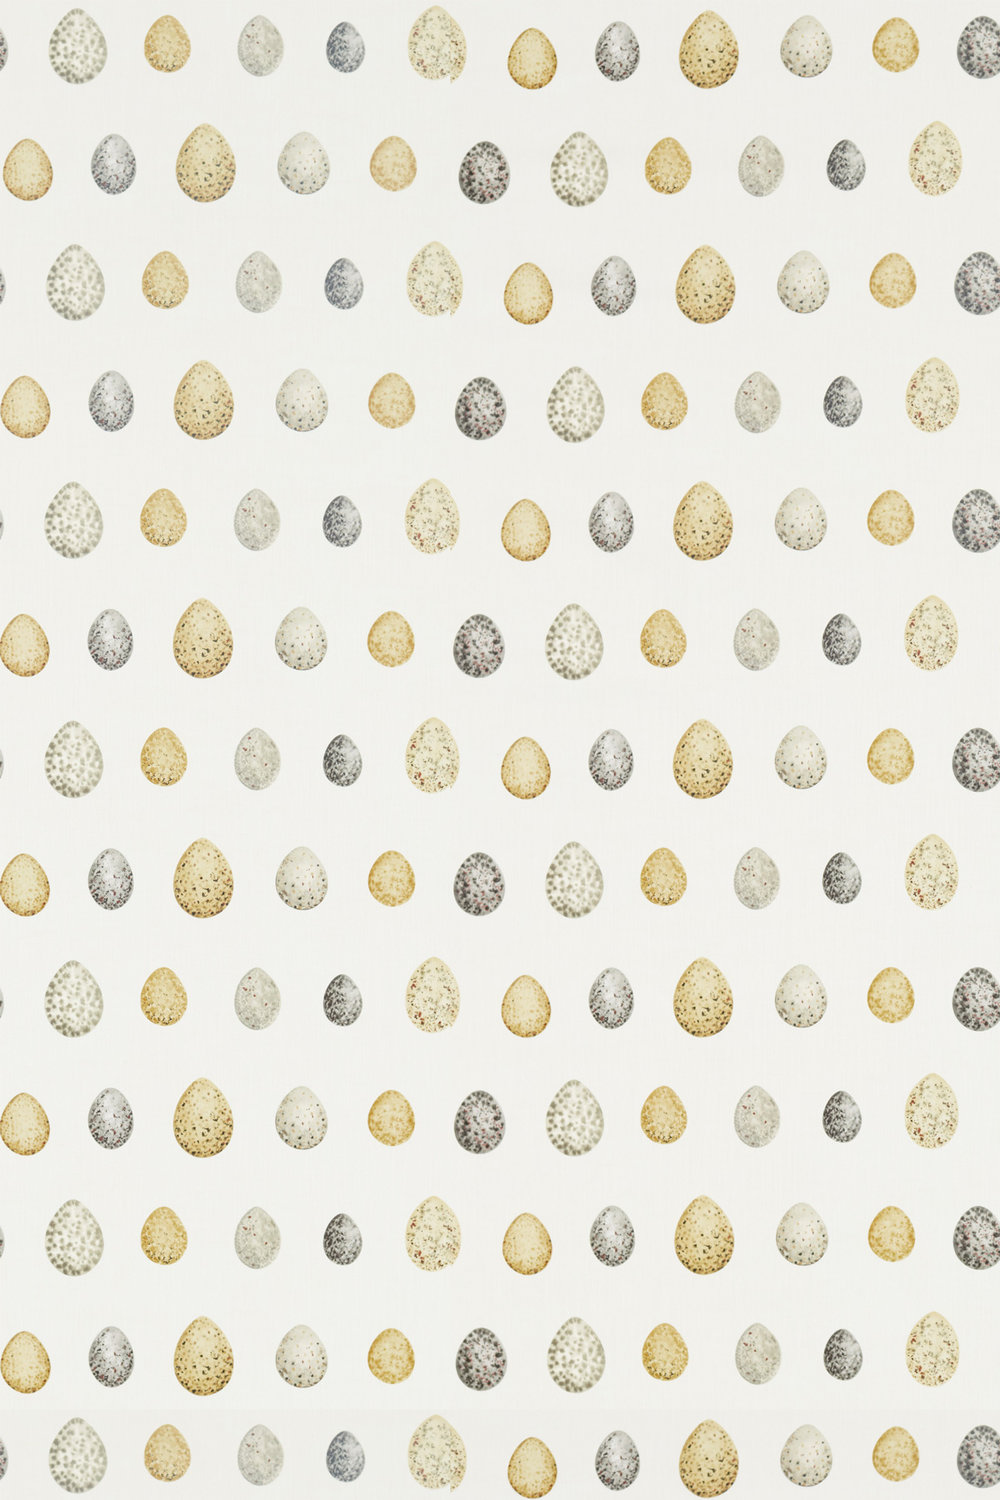 Nest Egg Fabric - Corn and Graphite - by Sanderson